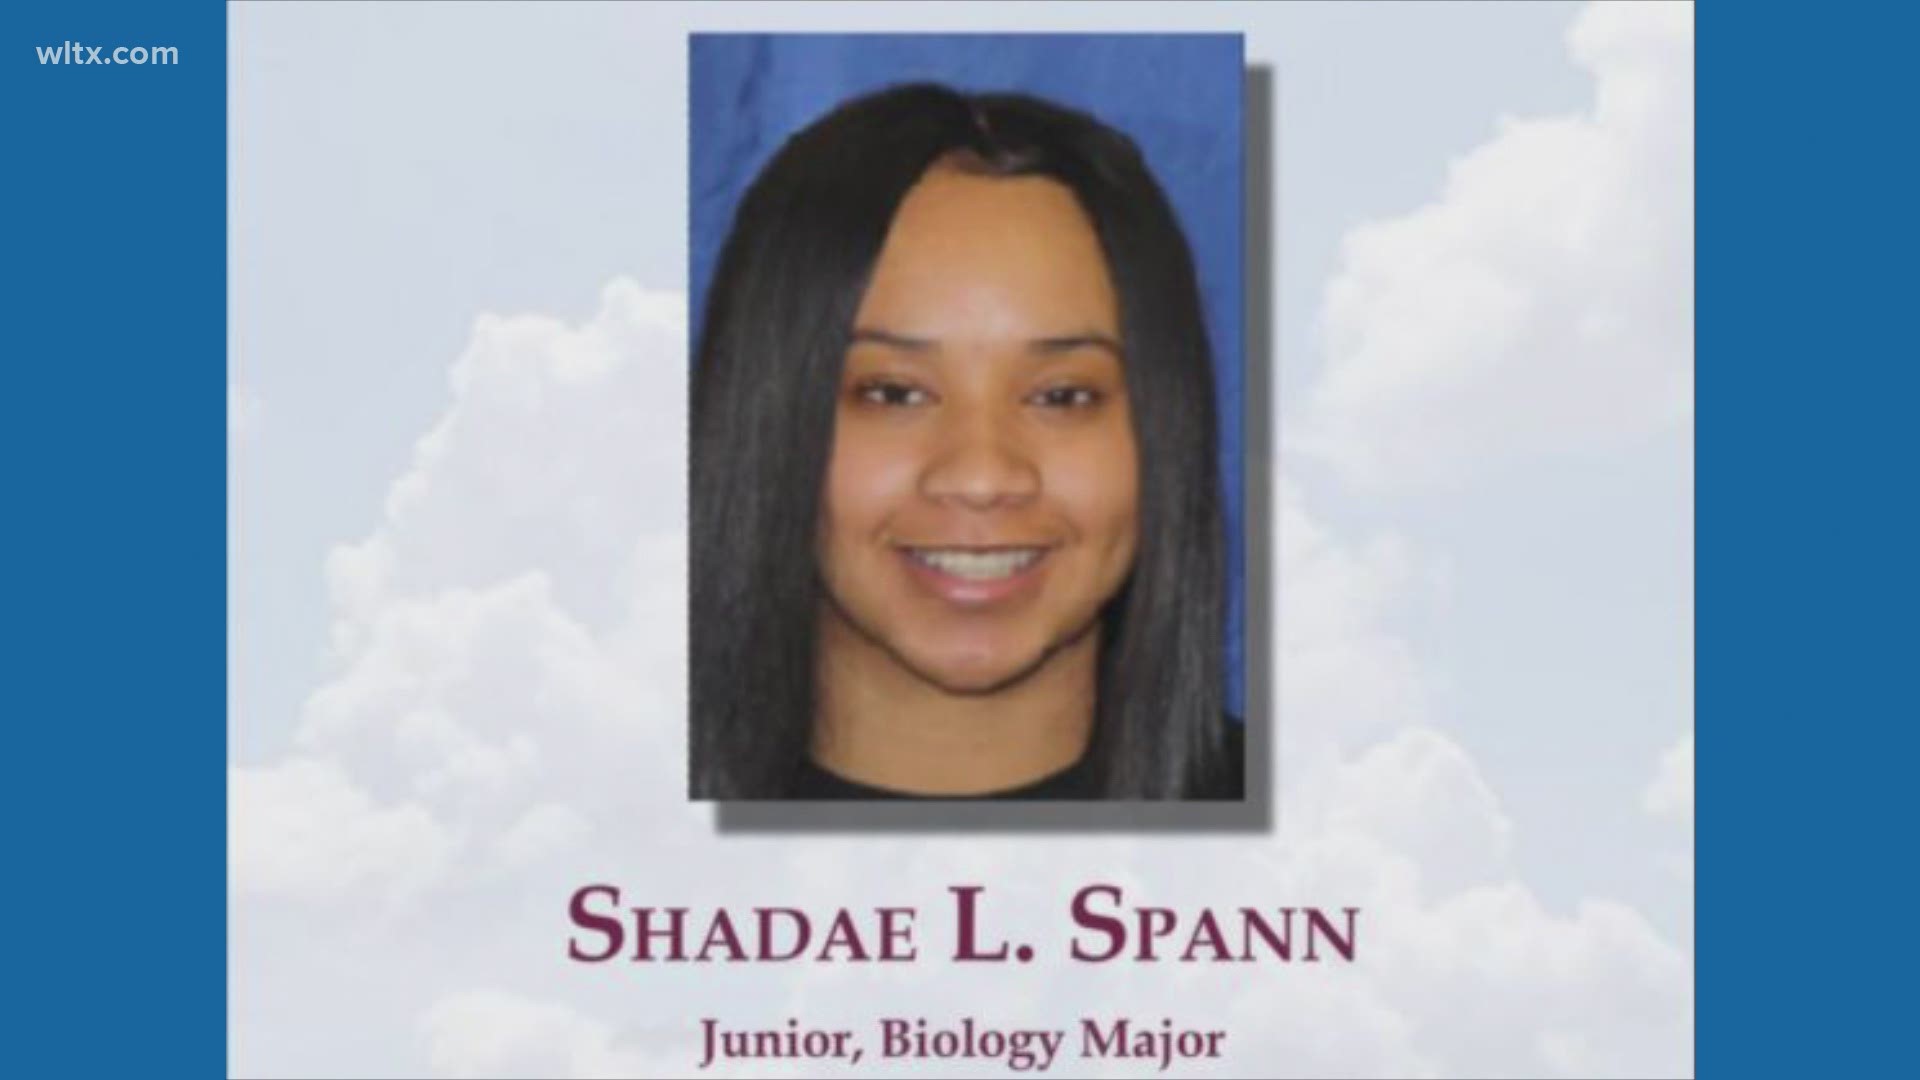 The accident claimed the life of Shadae Spann, a junior biology major.